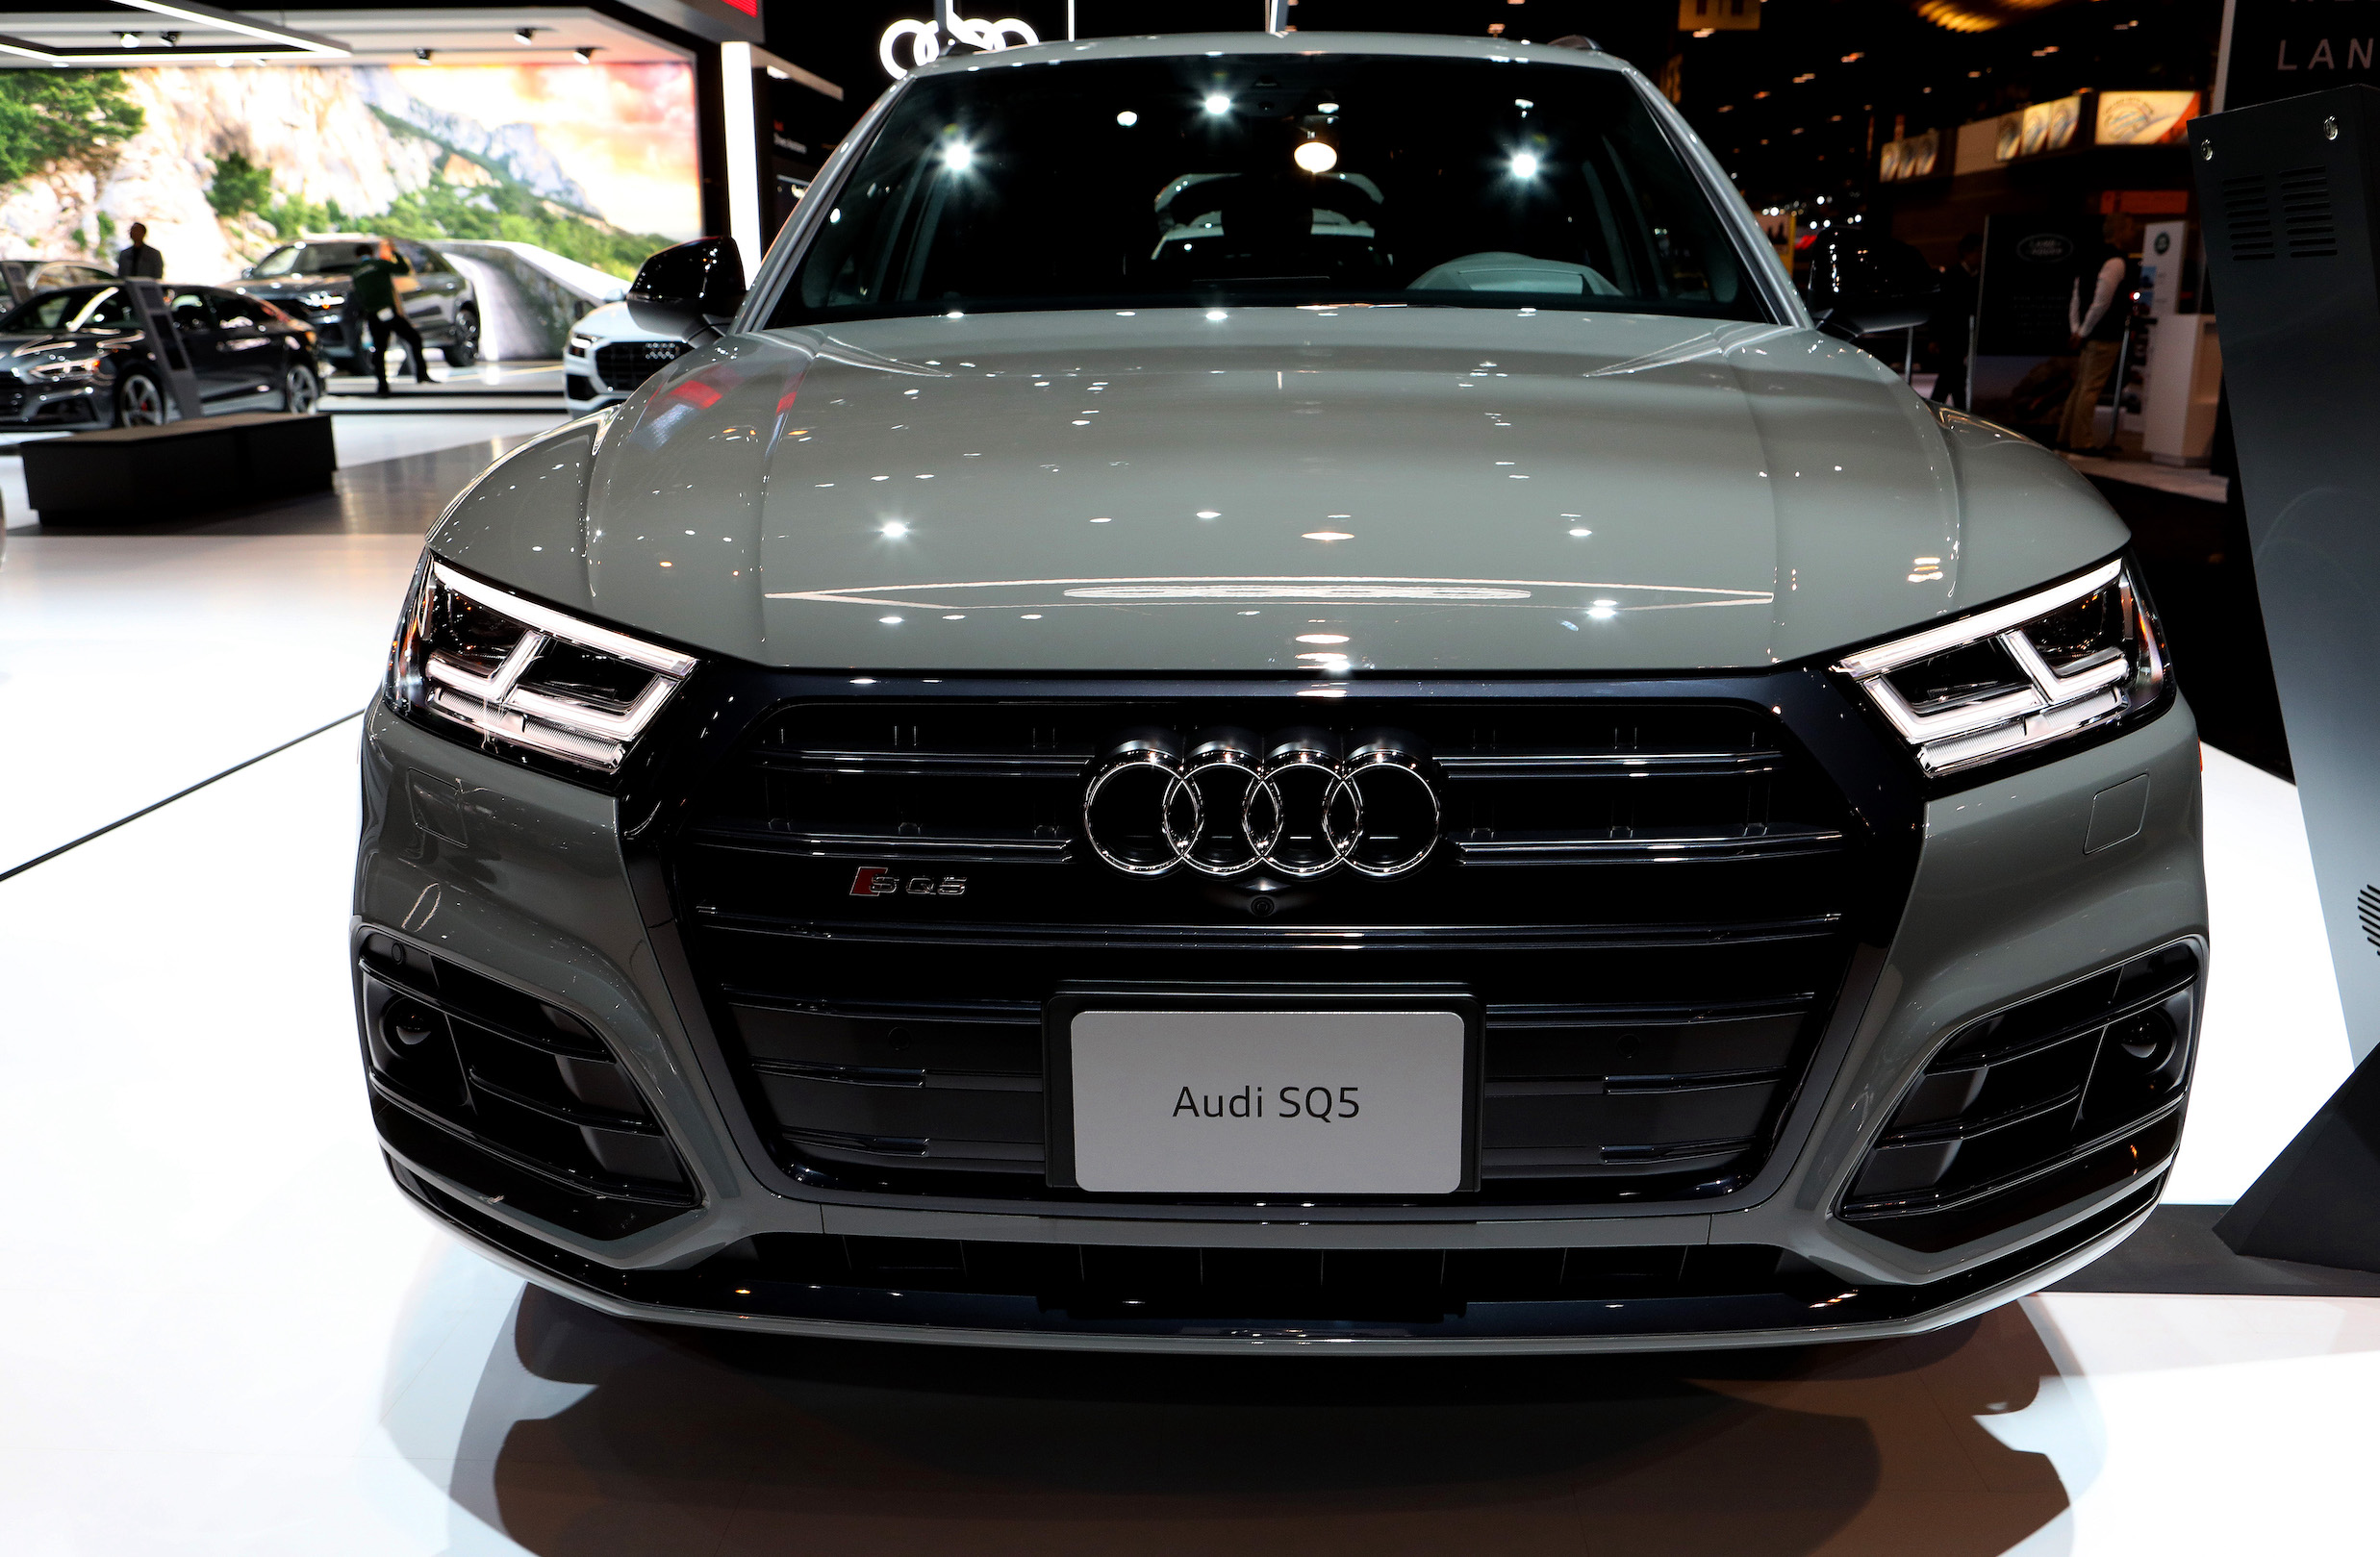 2019 Audi SQ5 is on display at the 111th Annual Chicago Auto Show at McCormick Place